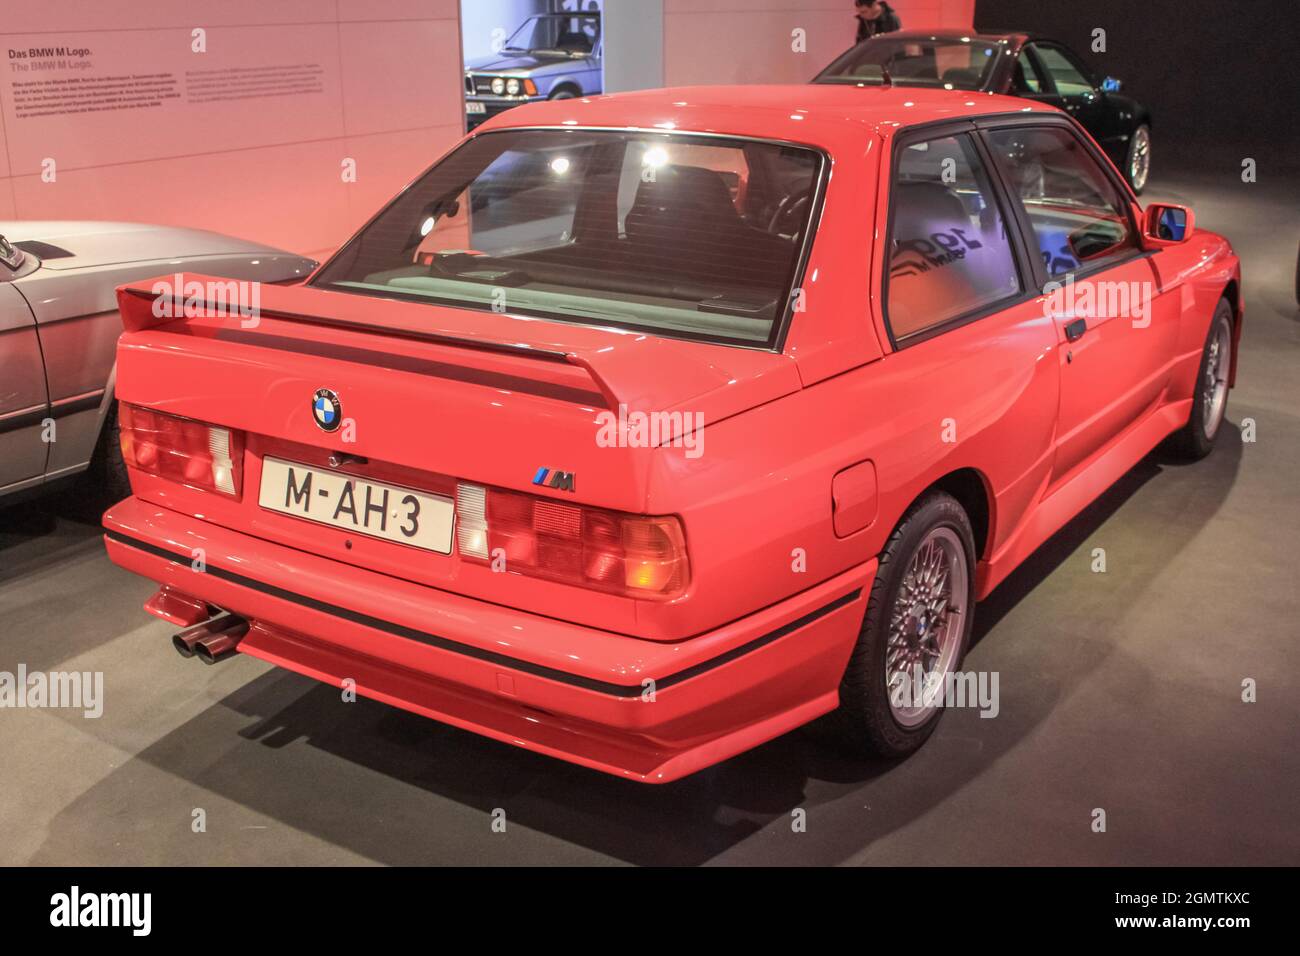 BMW M3 E30. This sports coupe won many events in DTM, WTCC, Superturismo  and BTCC in the late '80s. BMW Museum showroom. Germany, Munich - April 27,  2 Stock Photo - Alamy